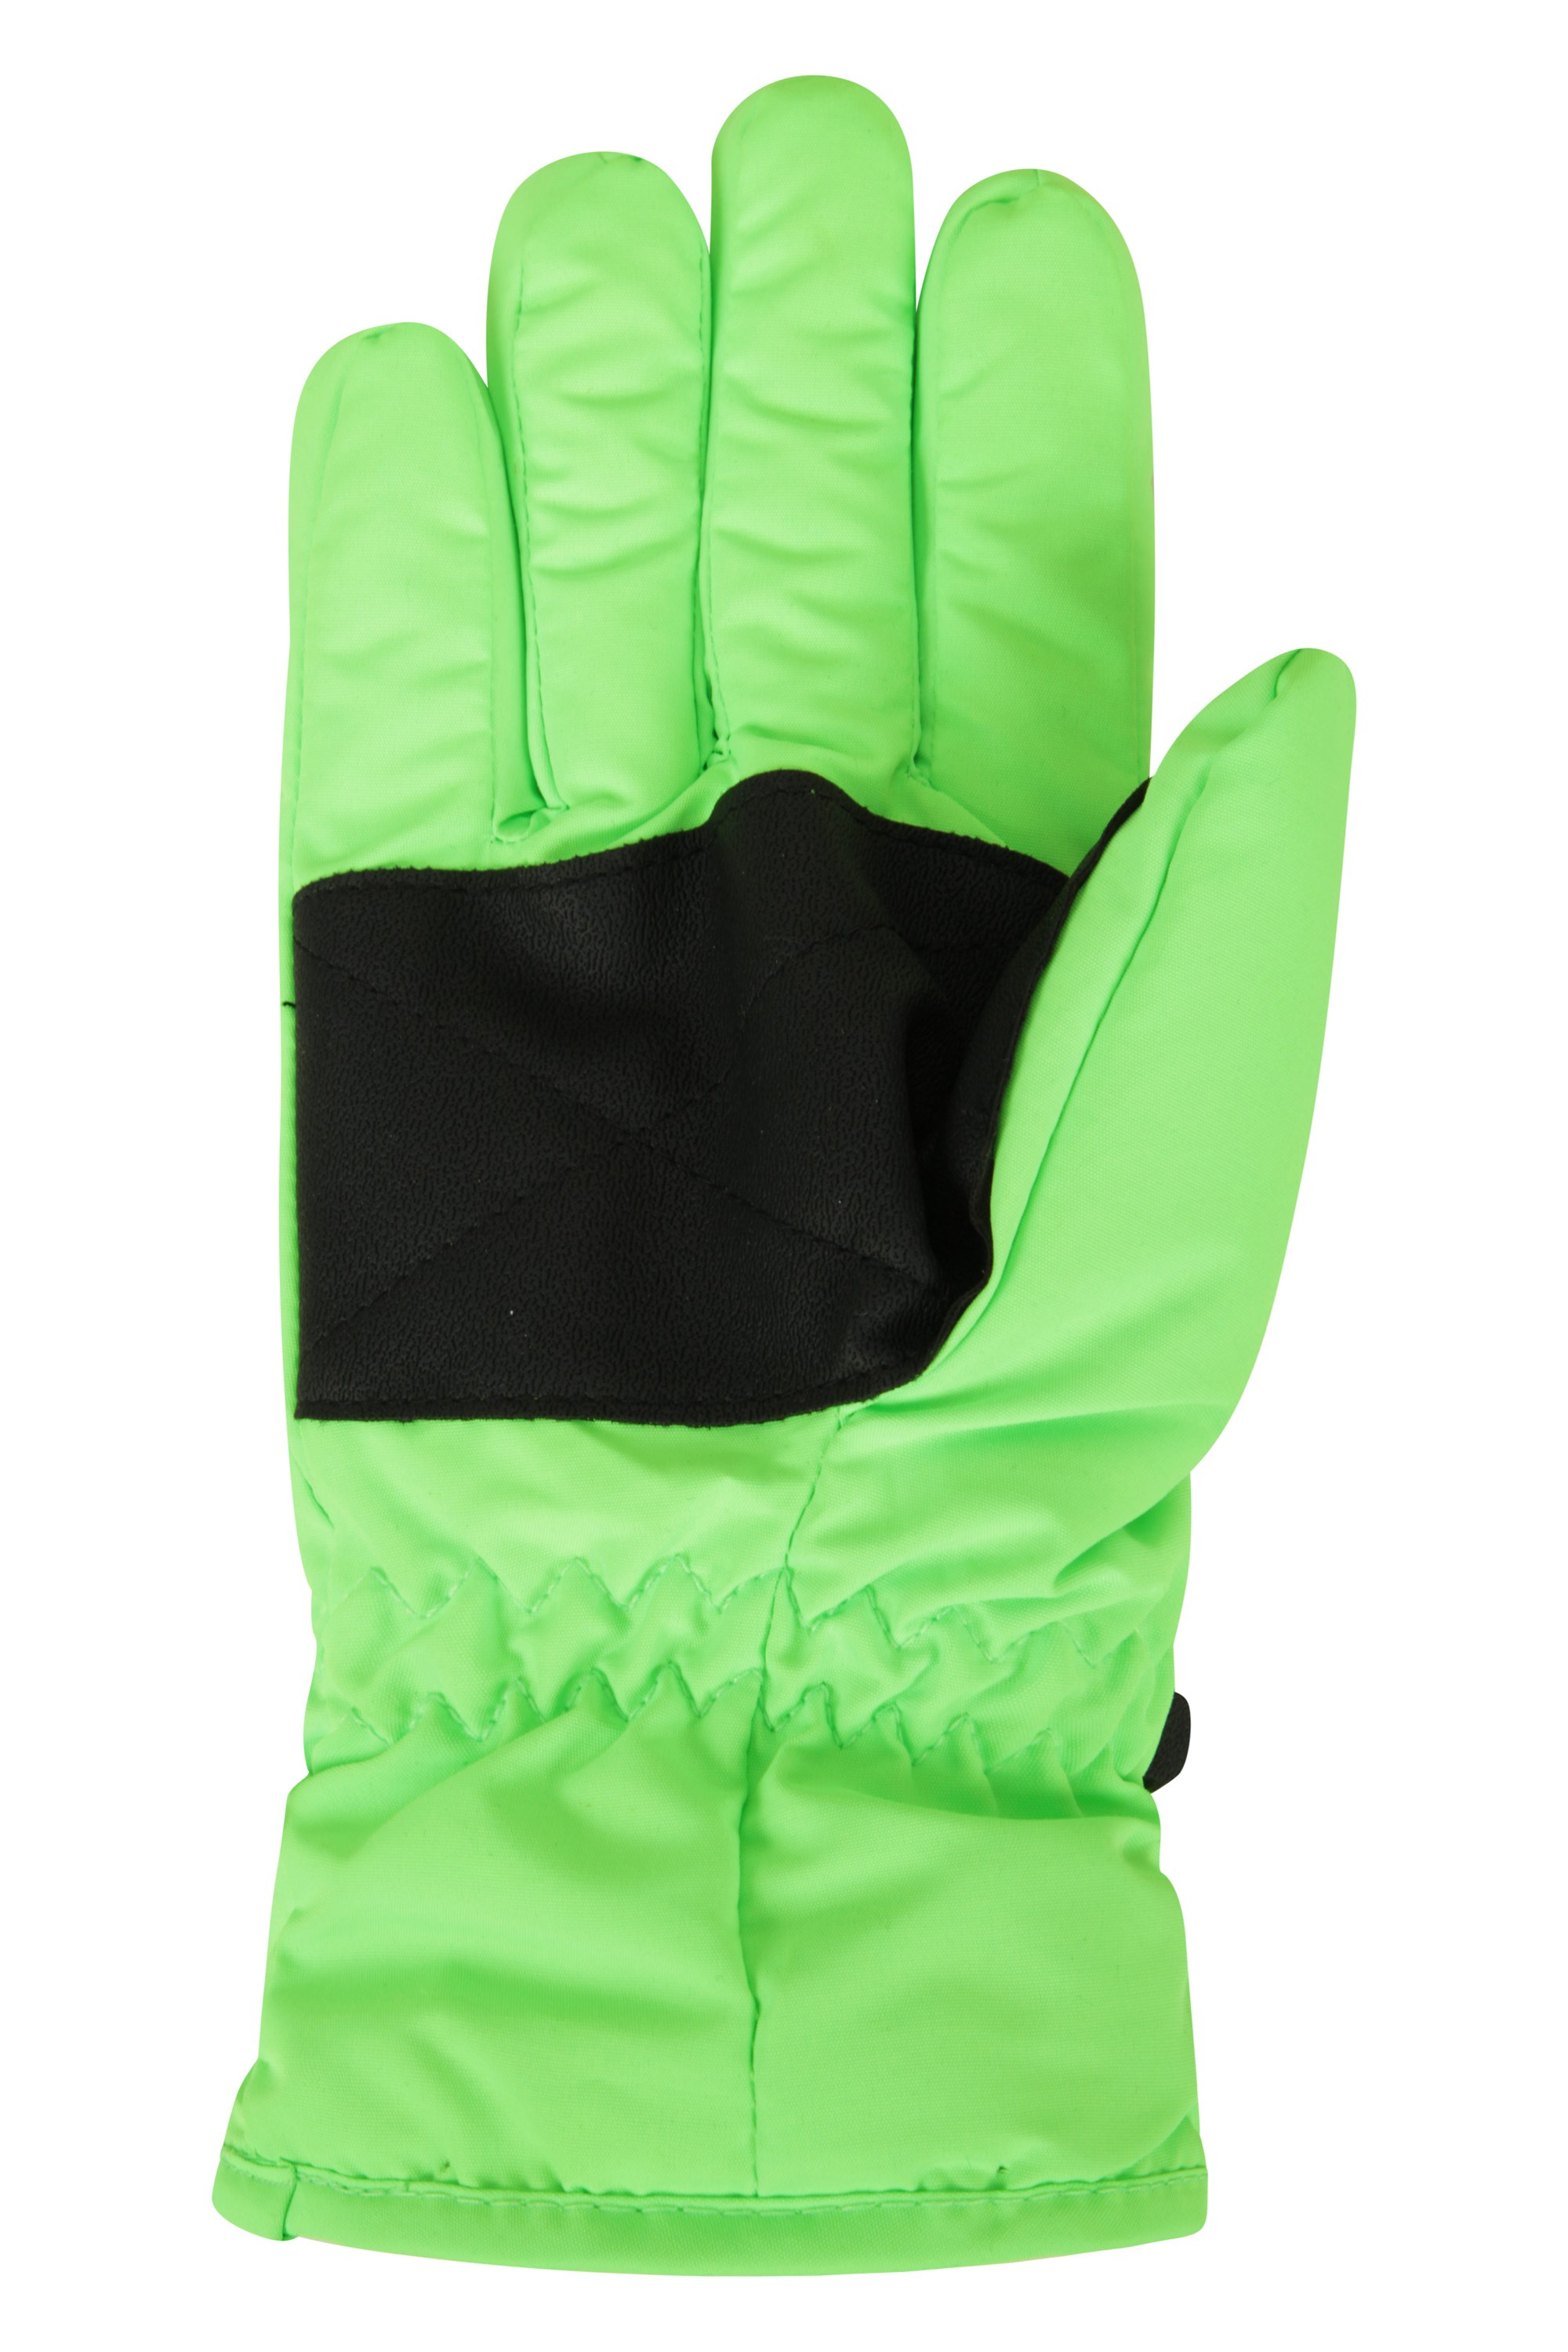 Mountain Warehouse Kids Gloves Snowproof with Fleece lined and Cuffs S/M/L/XL 